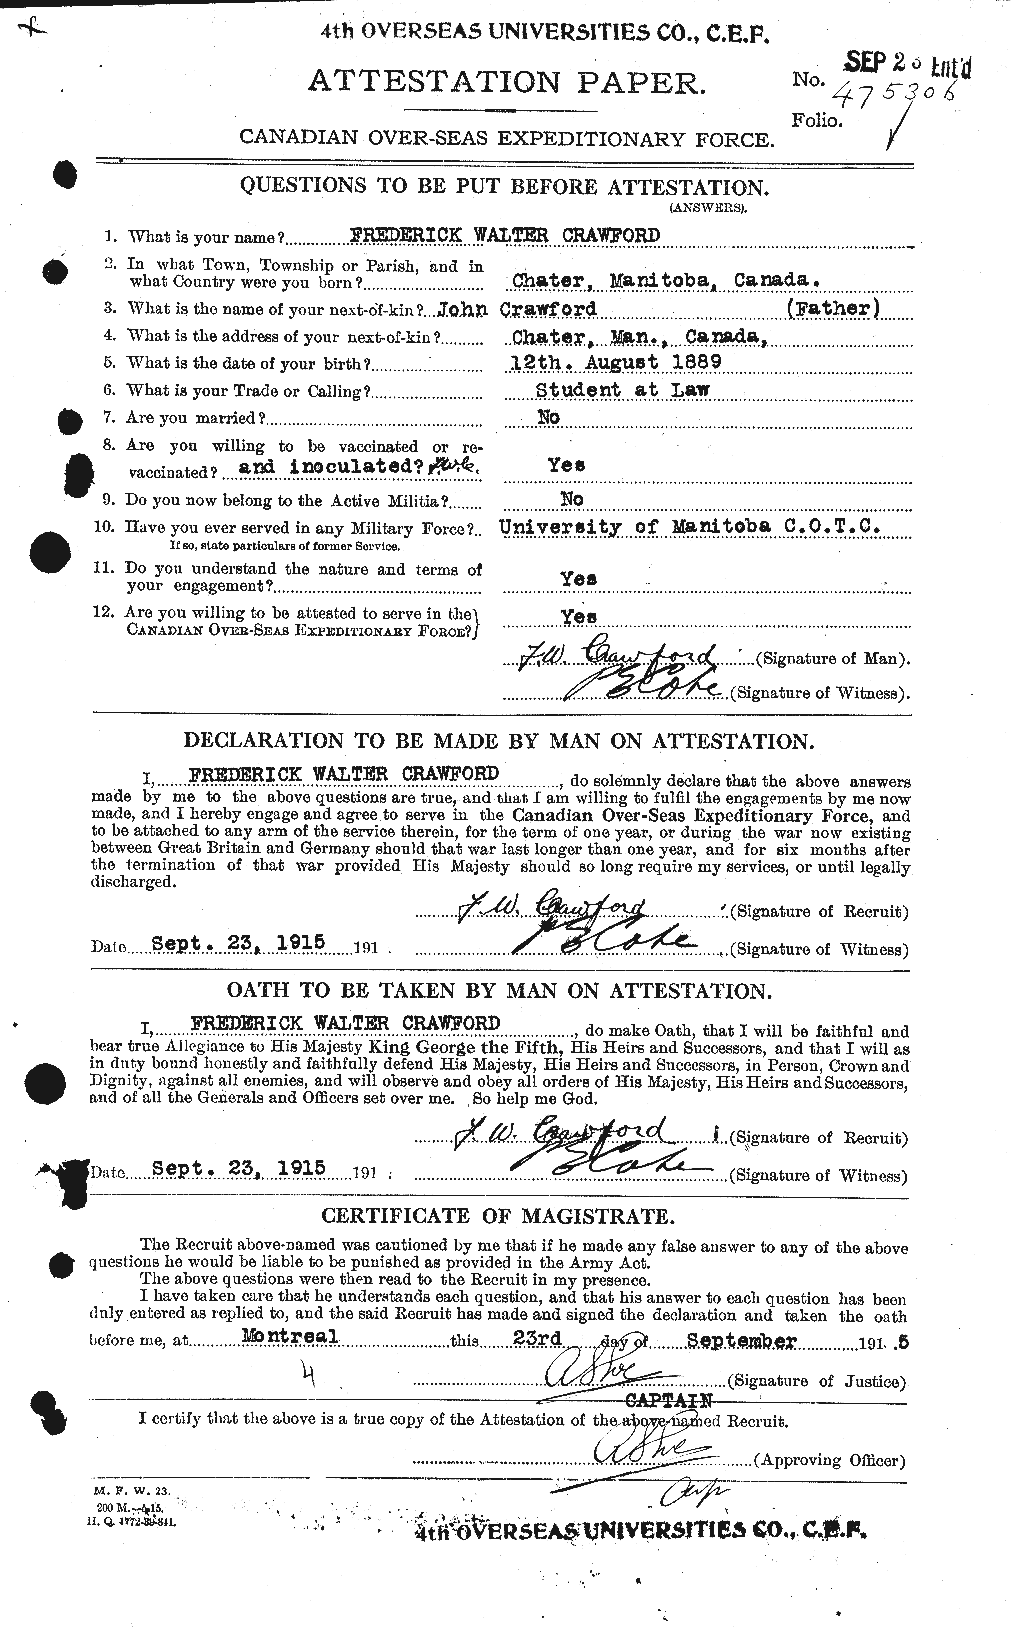 Personnel Records of the First World War - CEF 060722a